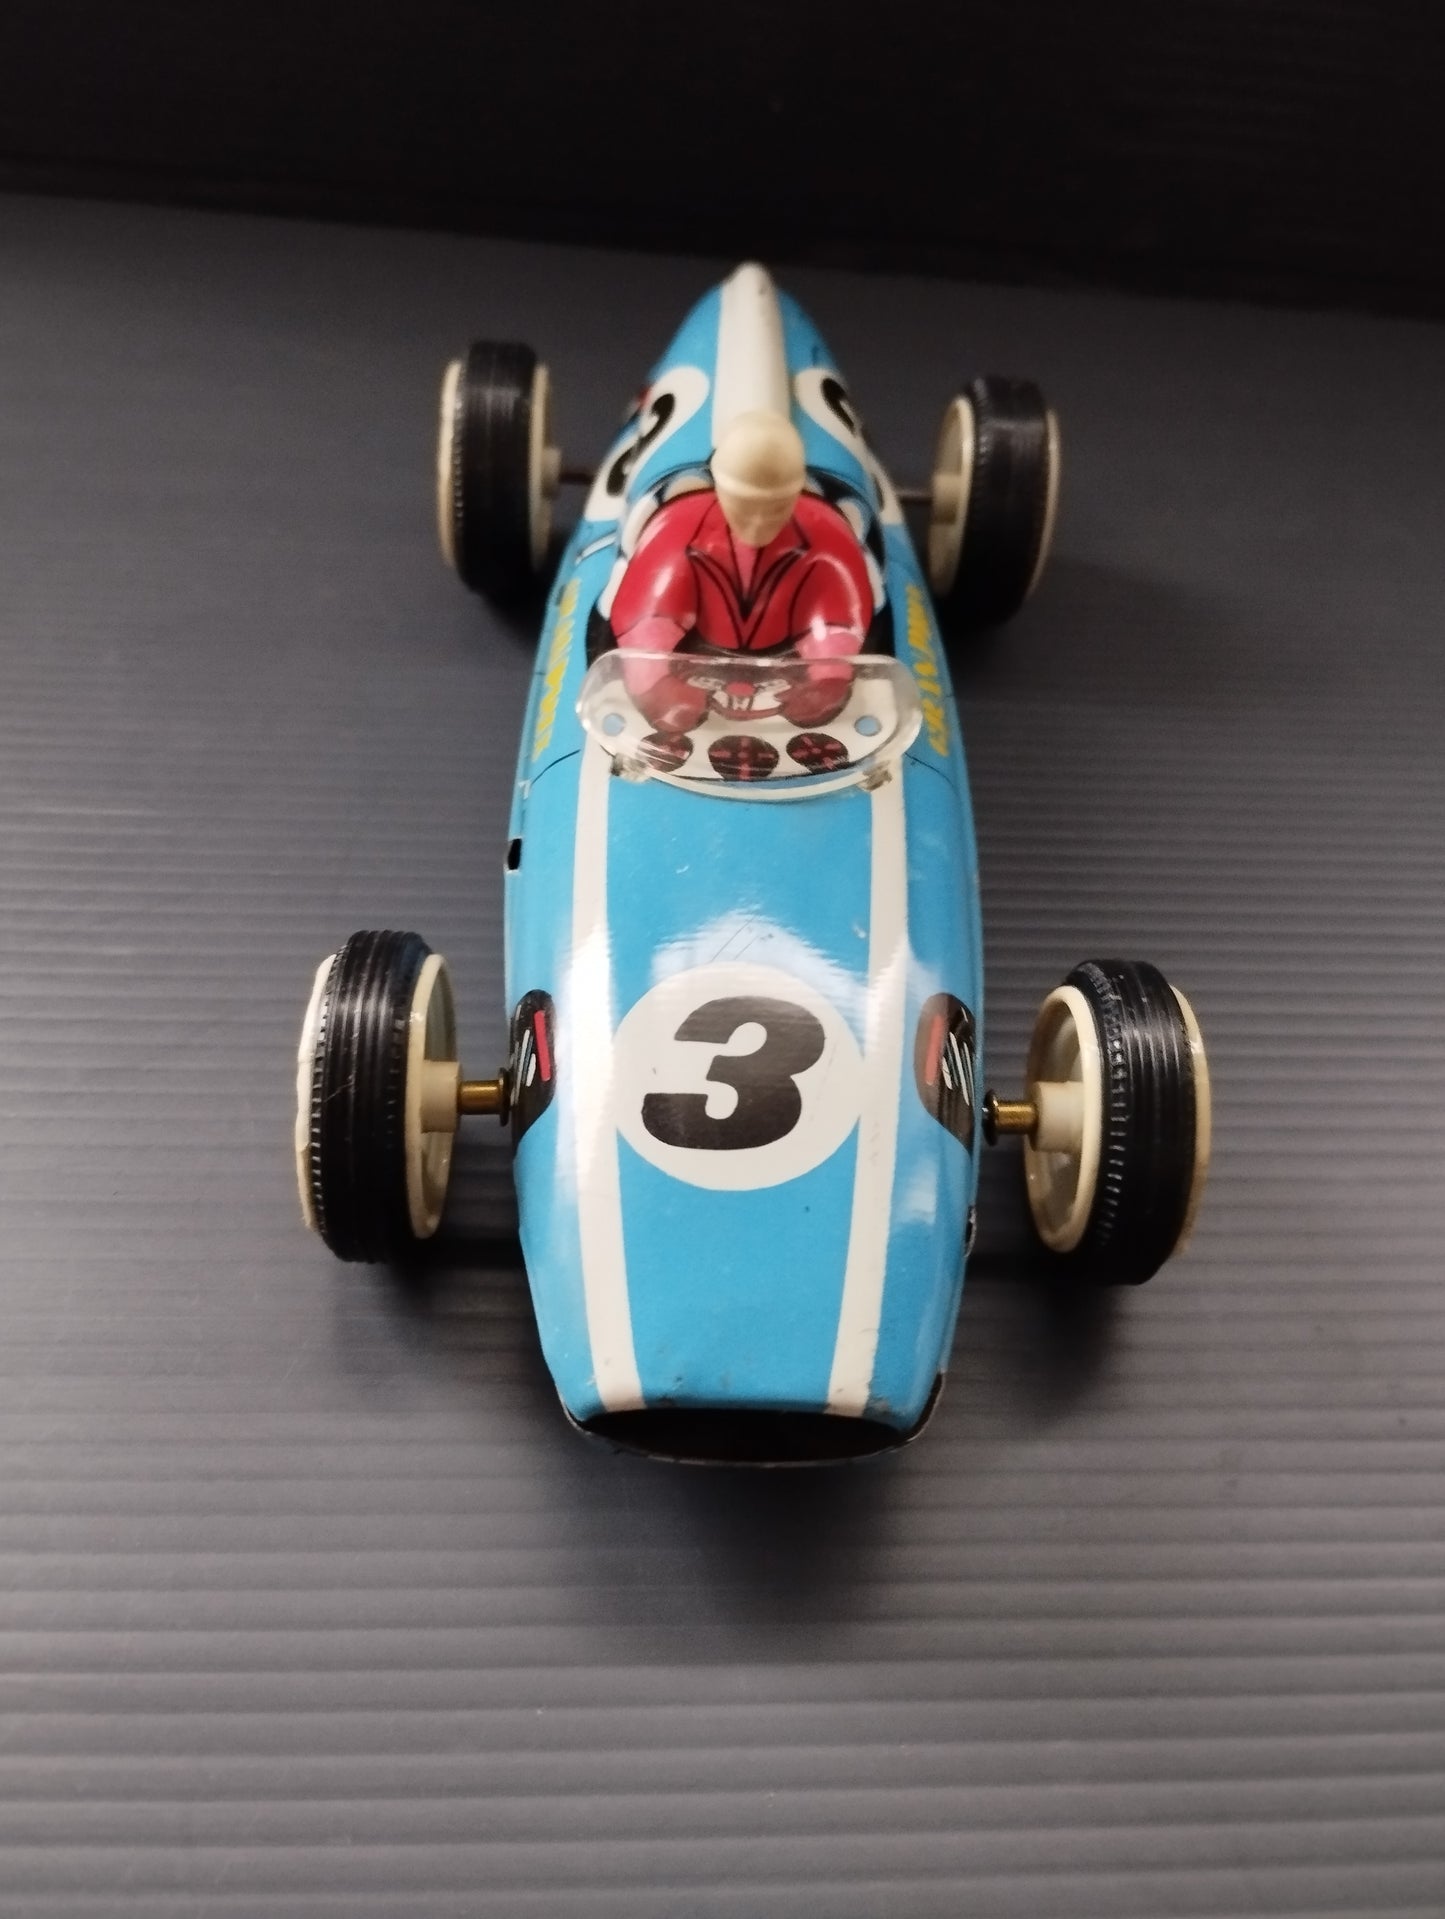 Grand Prix Form 1 model

 Produced by Marchesini